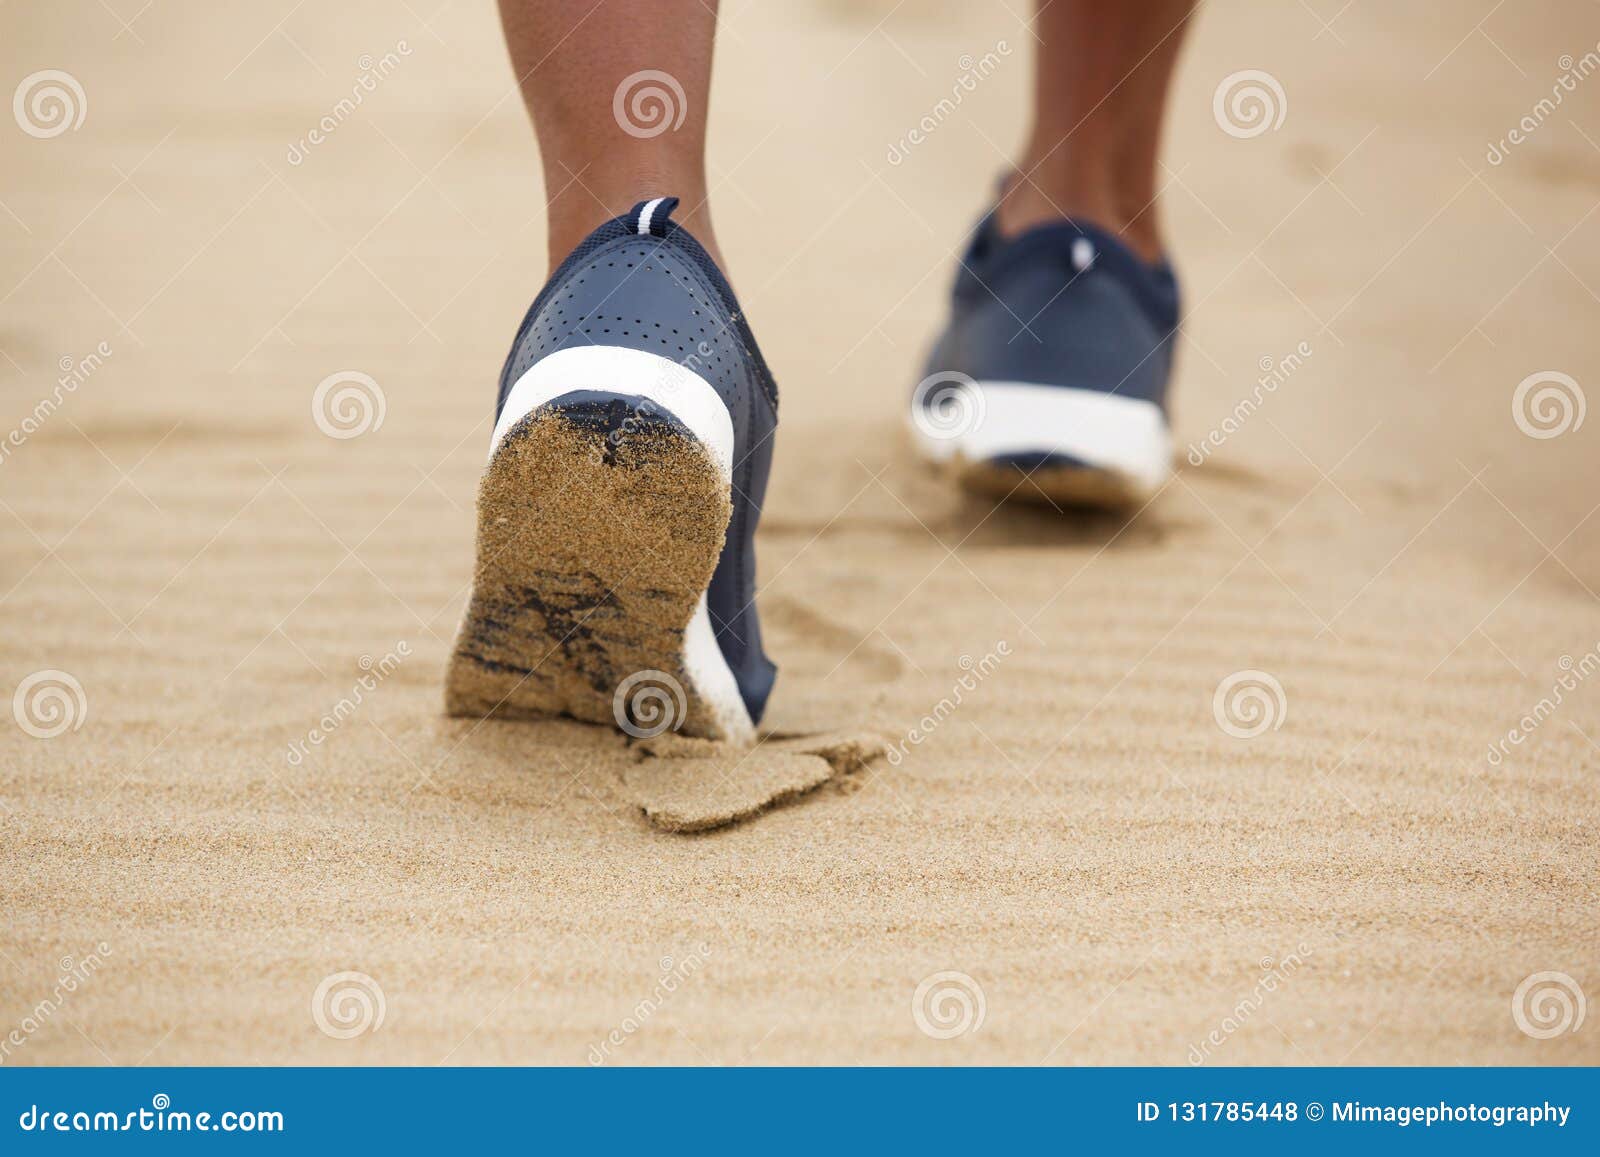 Low Angle Female Shoes Walking in Sand Stock Photo - Image of body, beach:  131785448